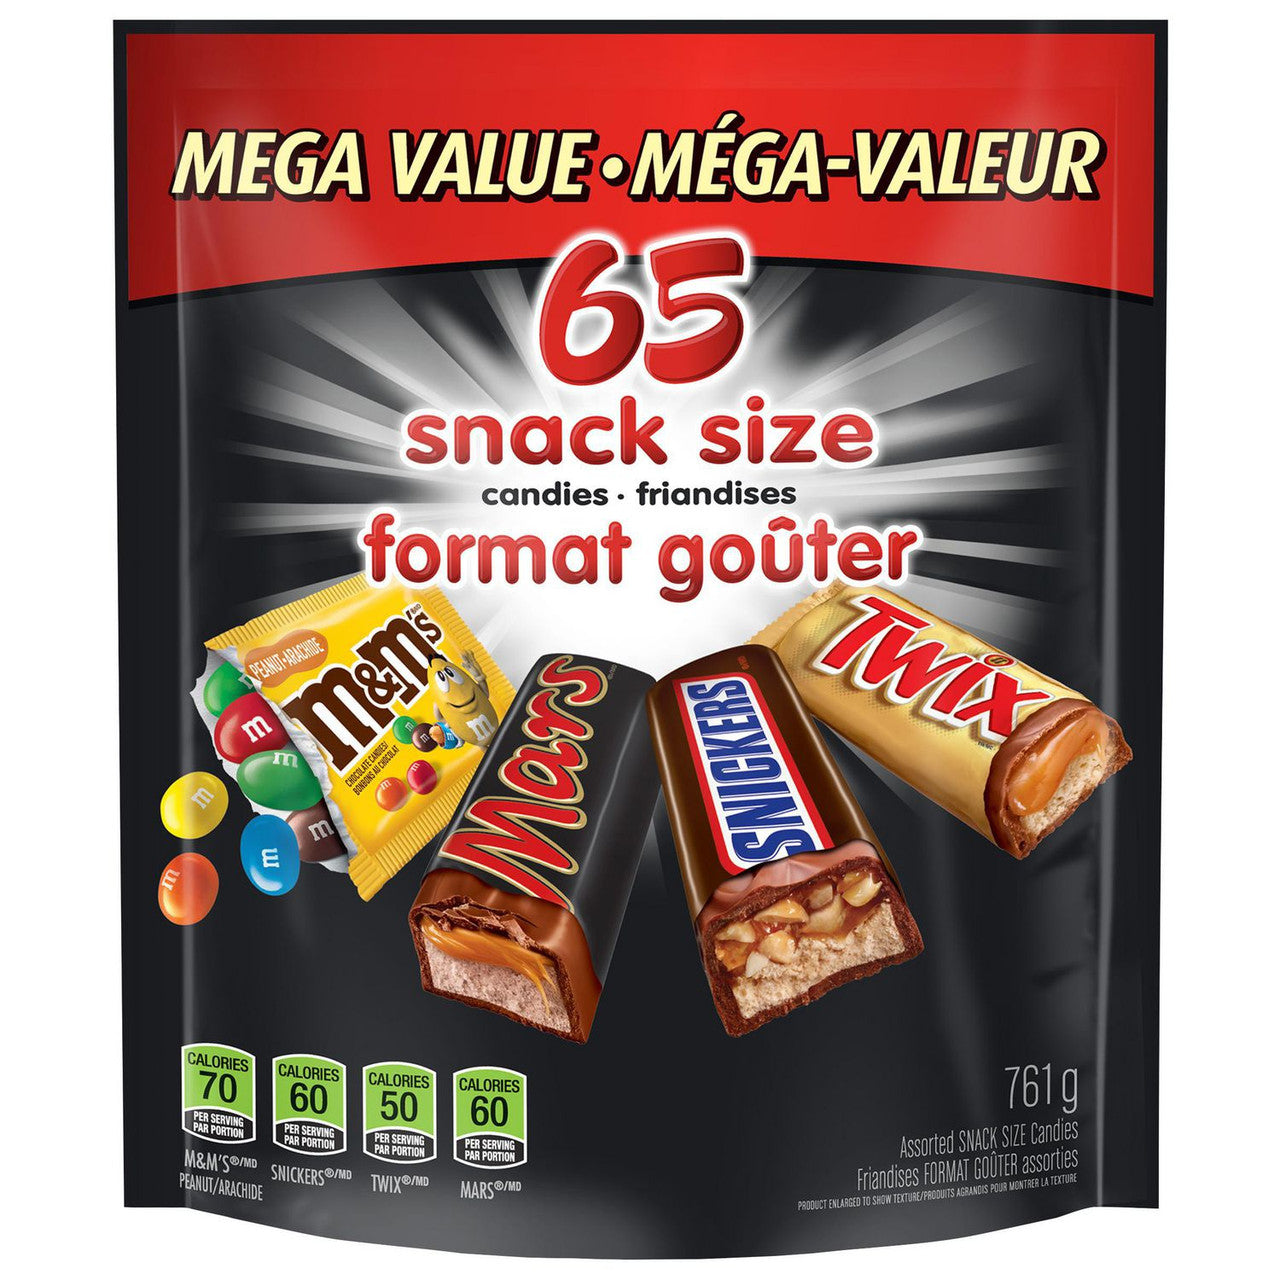 Mars Variety Assorted Fun Size Chocolate Candies, Mega Value, 65ct., 761g/1.7 lbs., {Imported from Canada}